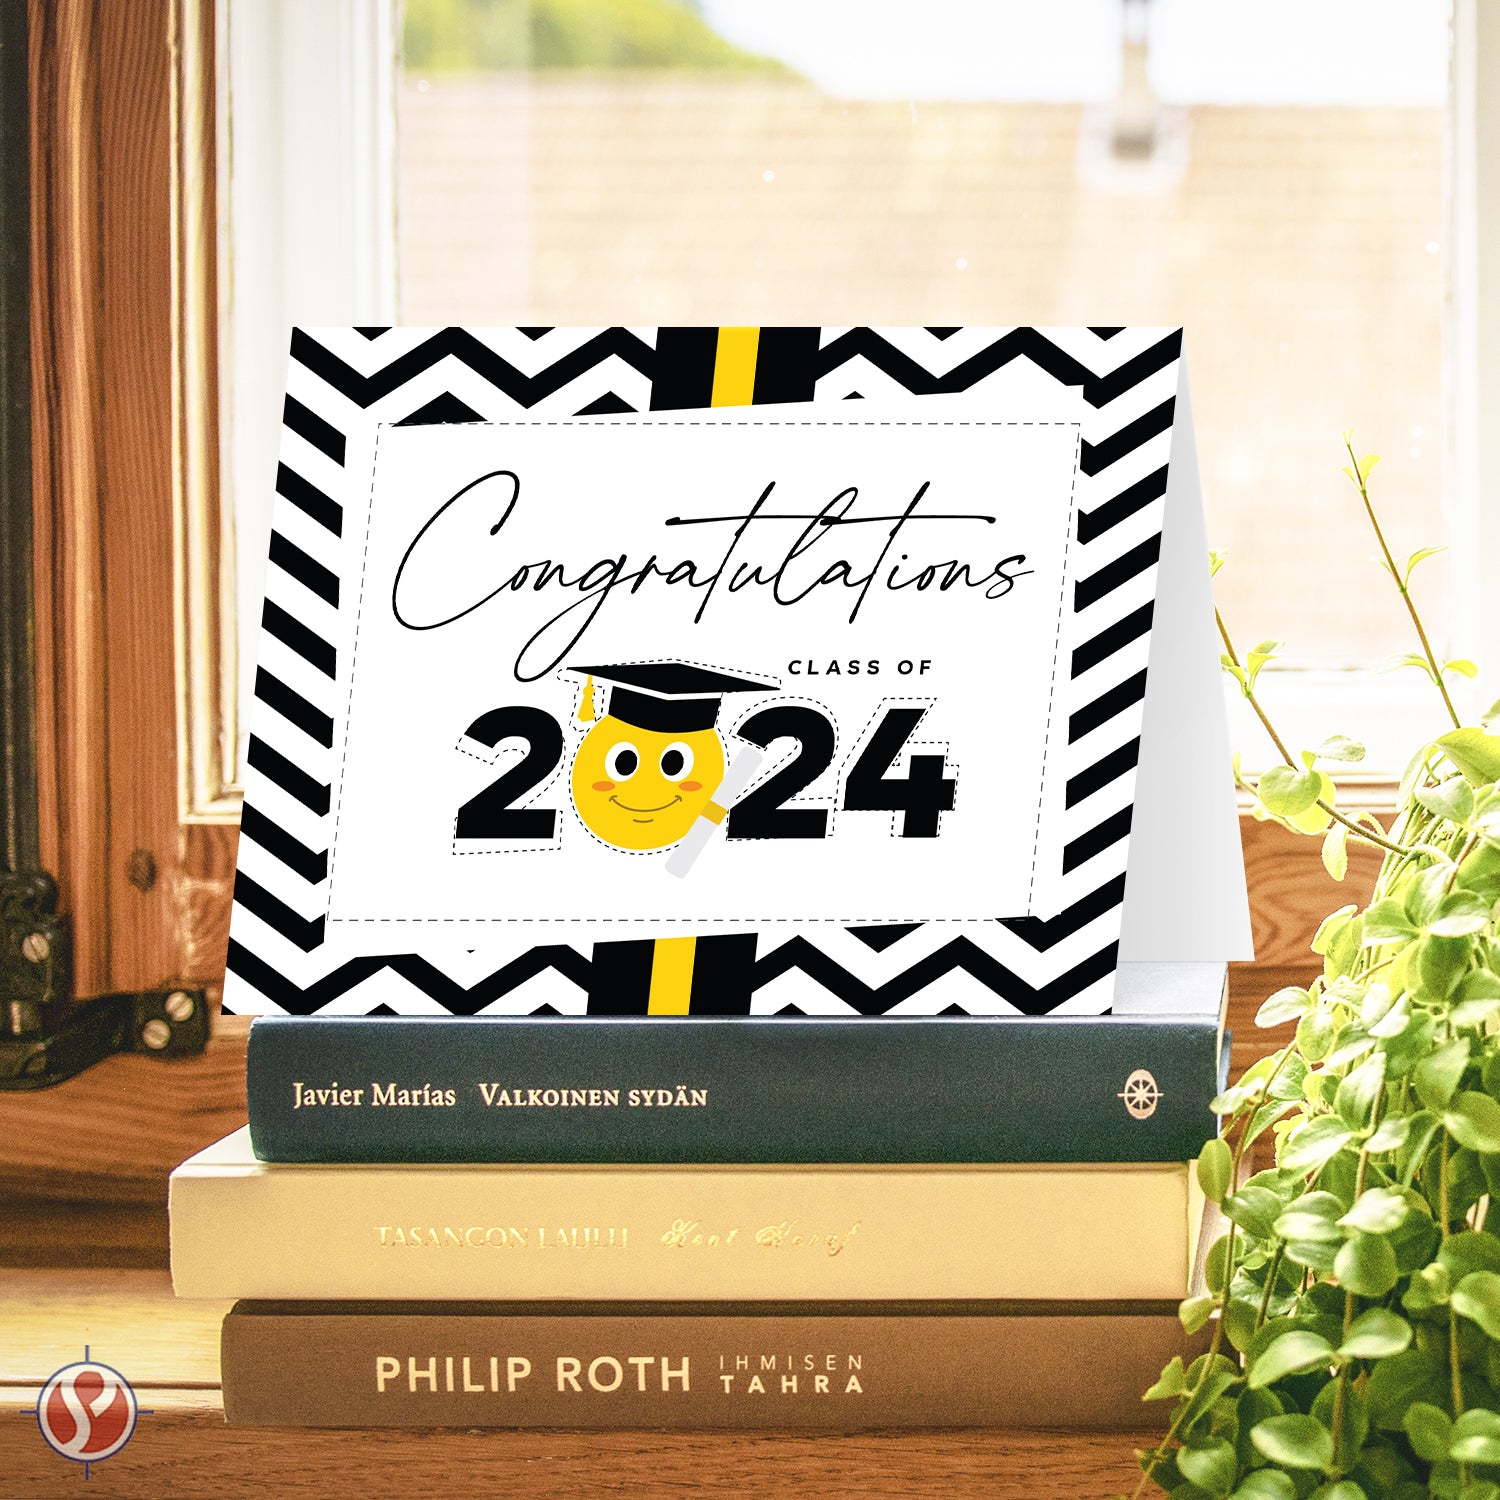 Class of 2024 Graduation Congratulations Cards – Celebrating a New Chapter in Life